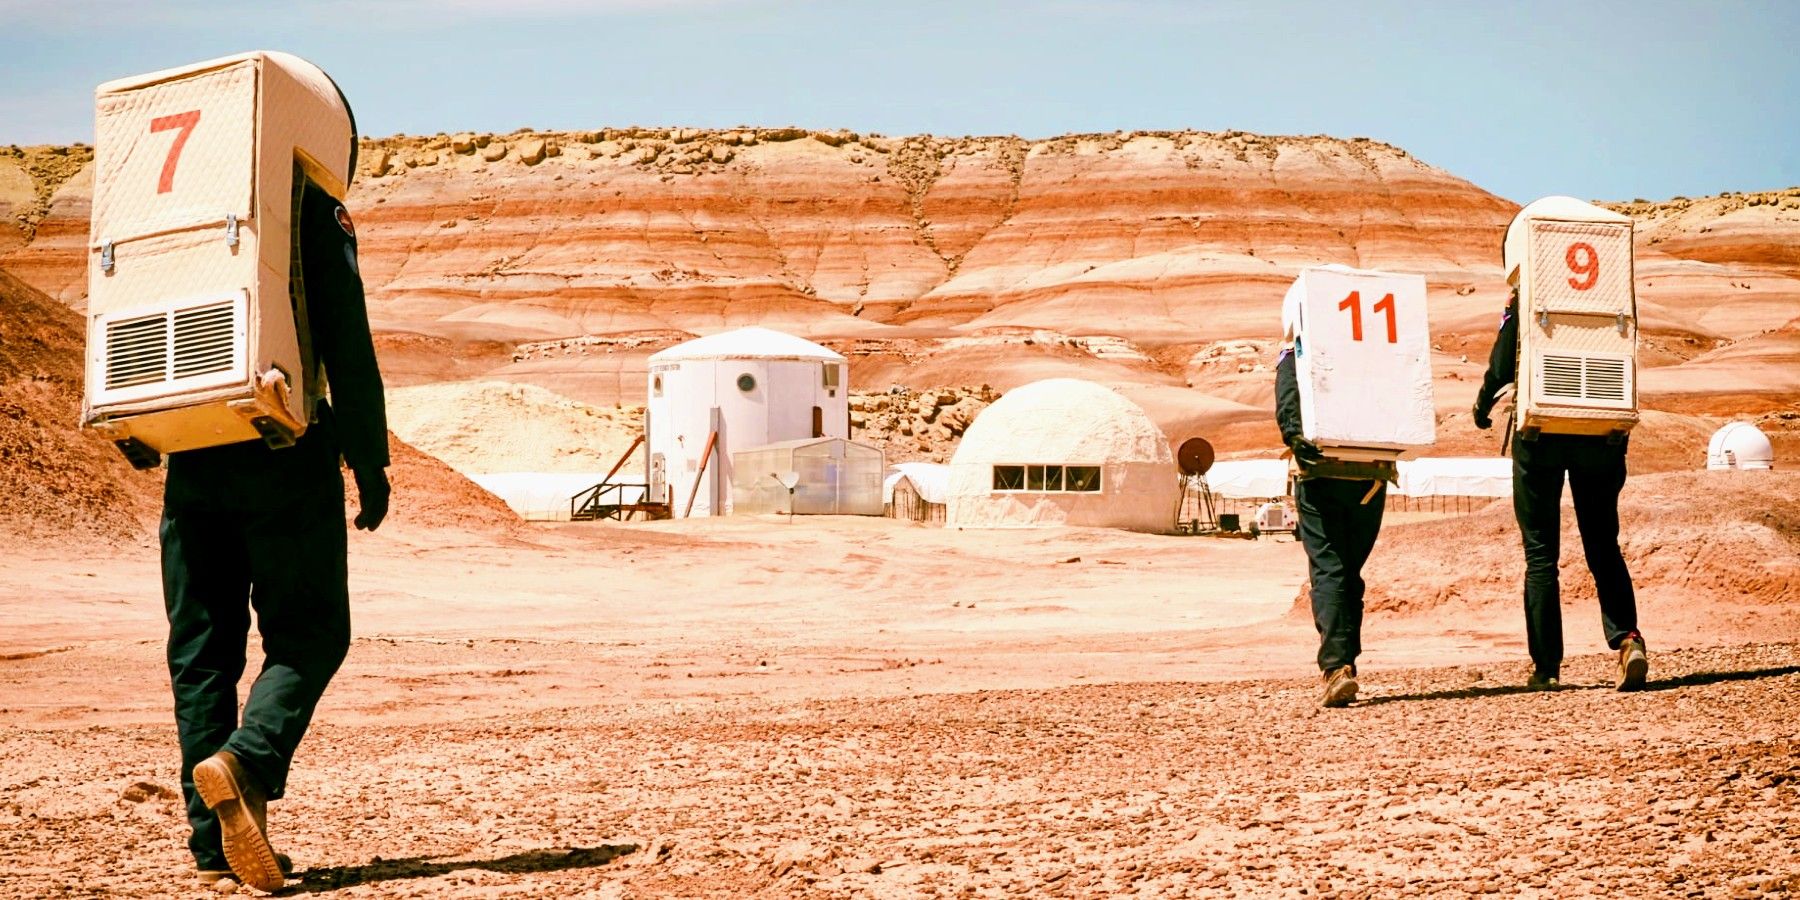 This Mars Simulation Is Being Ruined By Tourists And Drones